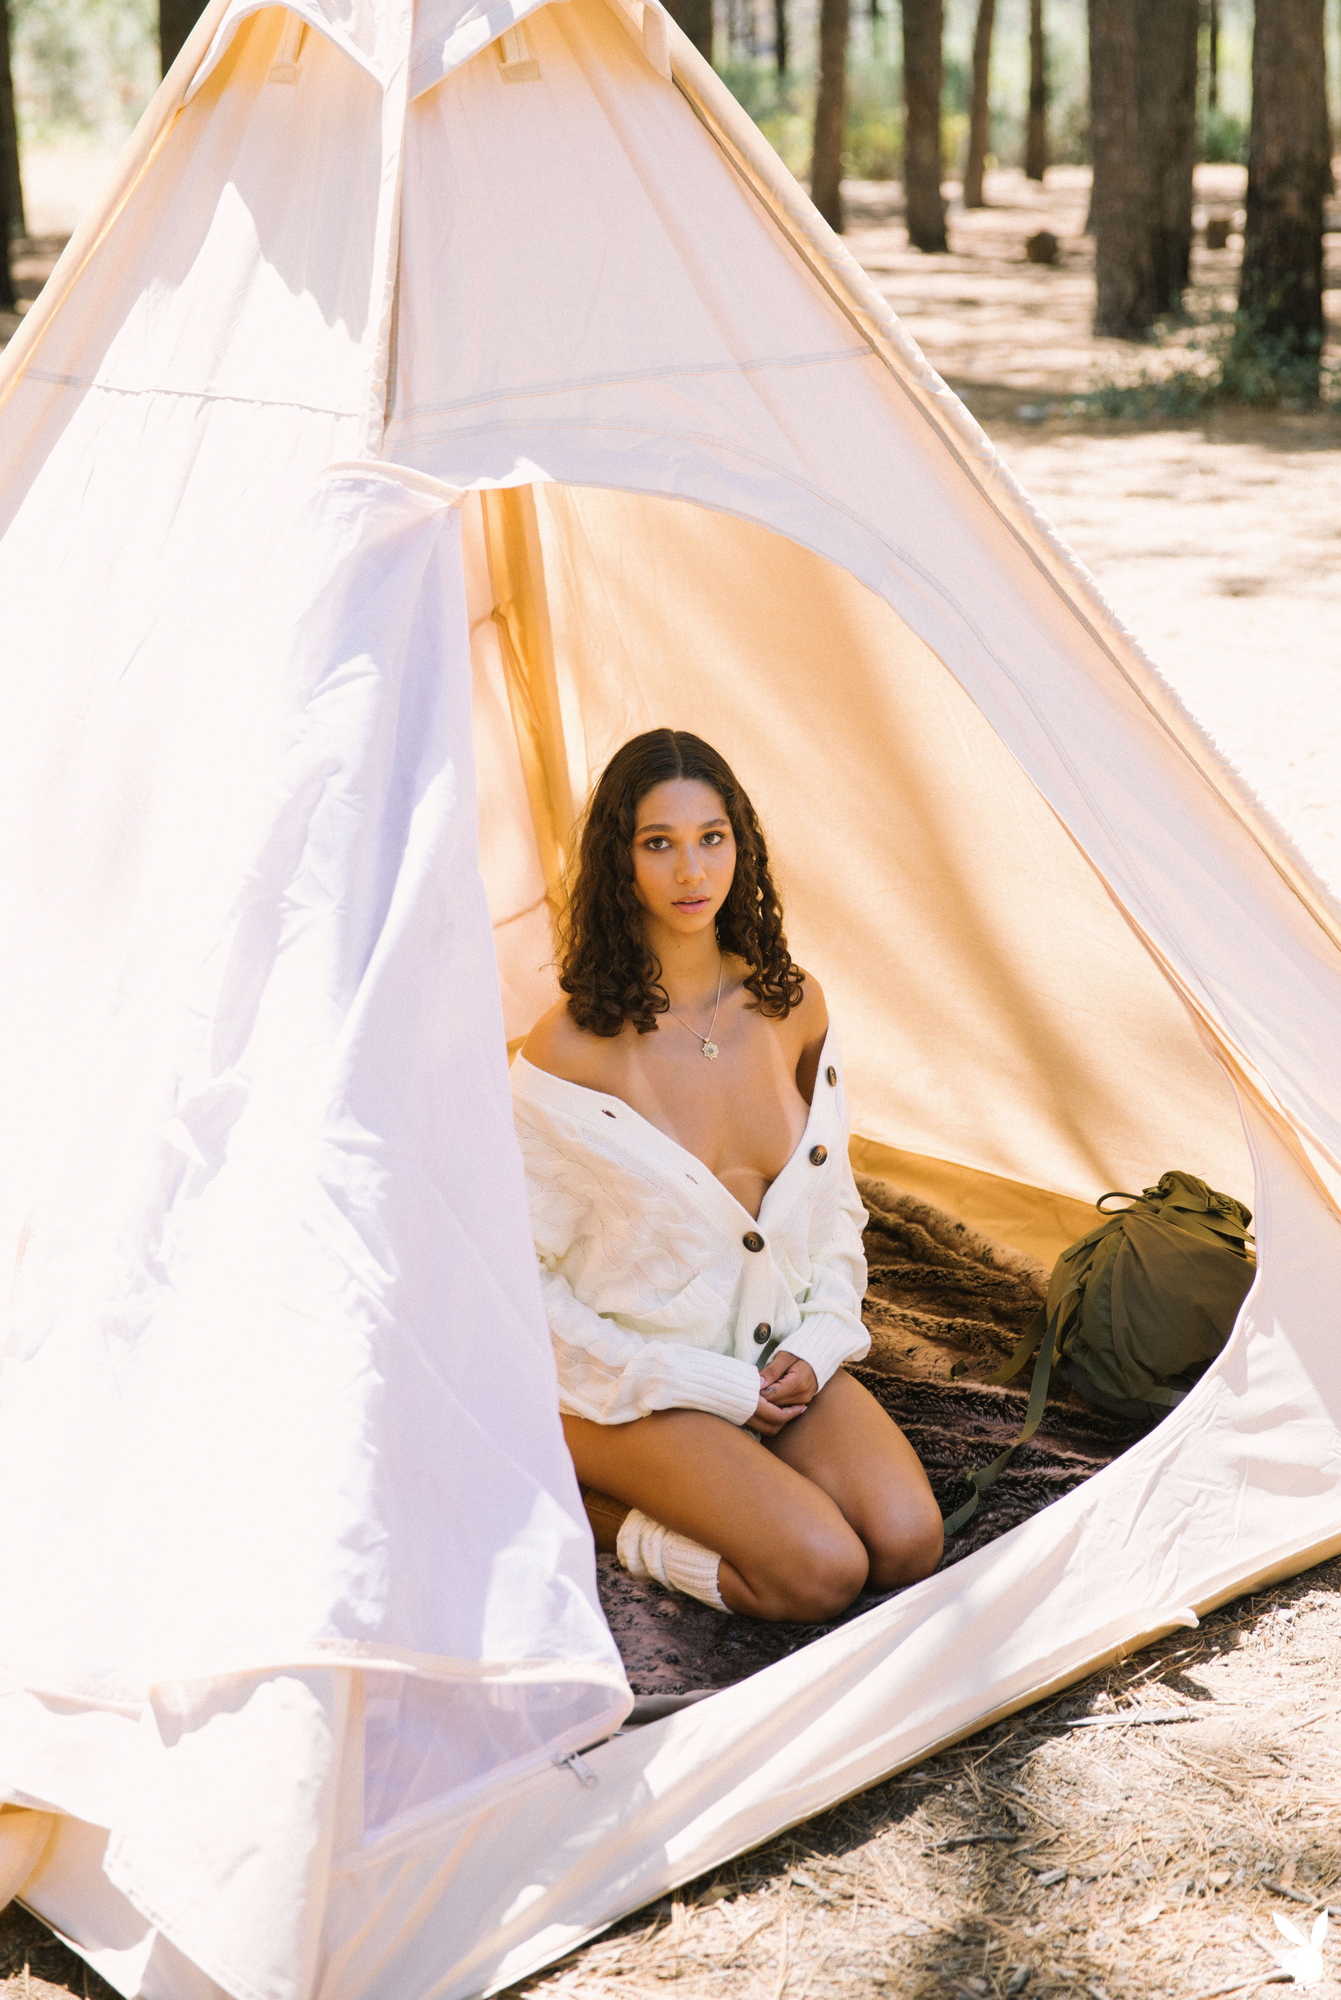 maia-serena-tranquil-setting-naked-brunette-tent-woods-playboy-10